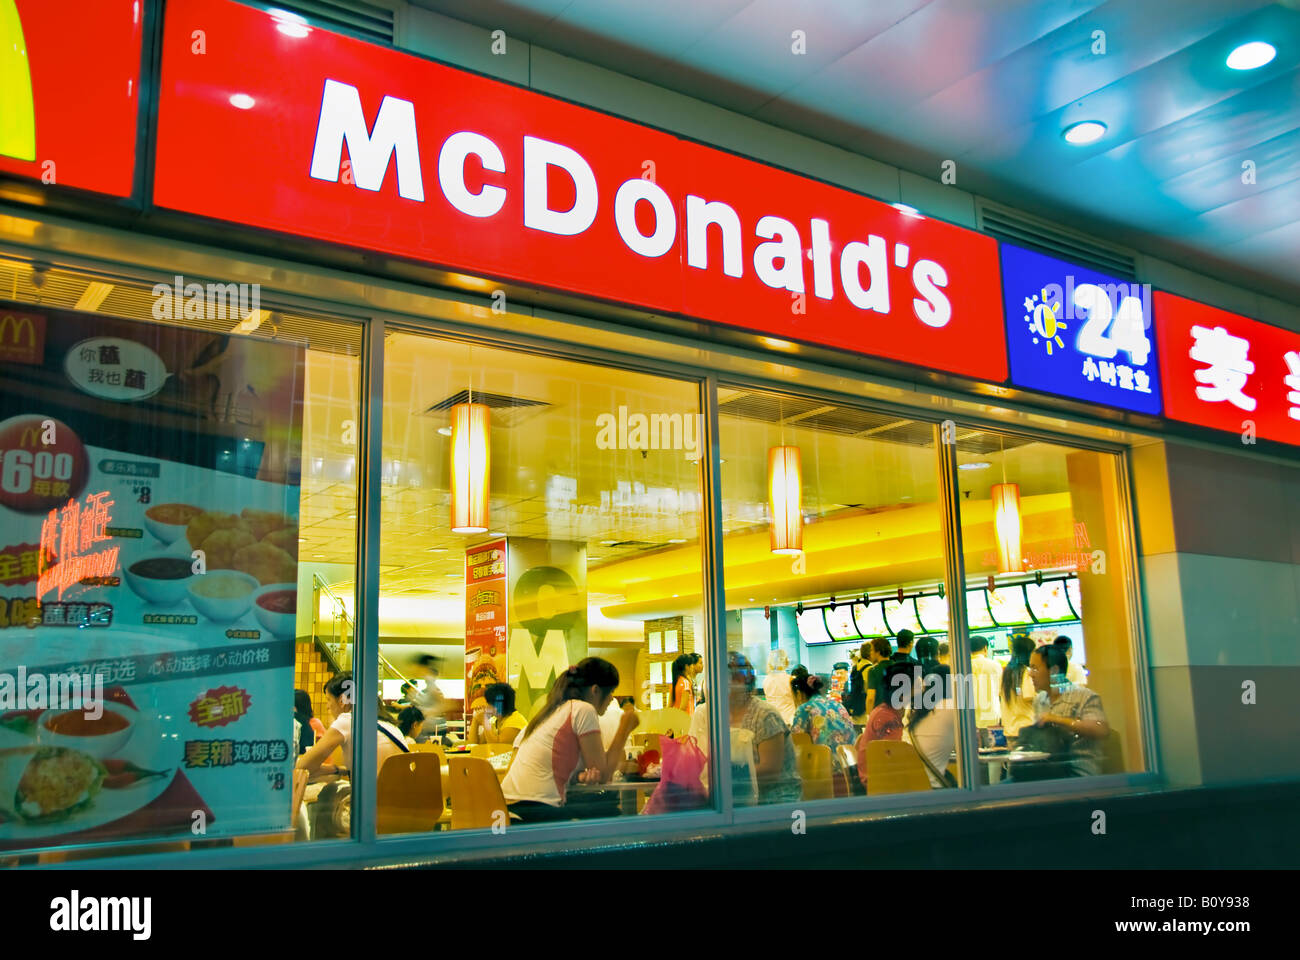 Beijing China, People, McDonald's Fast Food Restaurant from Outside Window ,Open 24 hours sign in window, globalized food Stock Photo